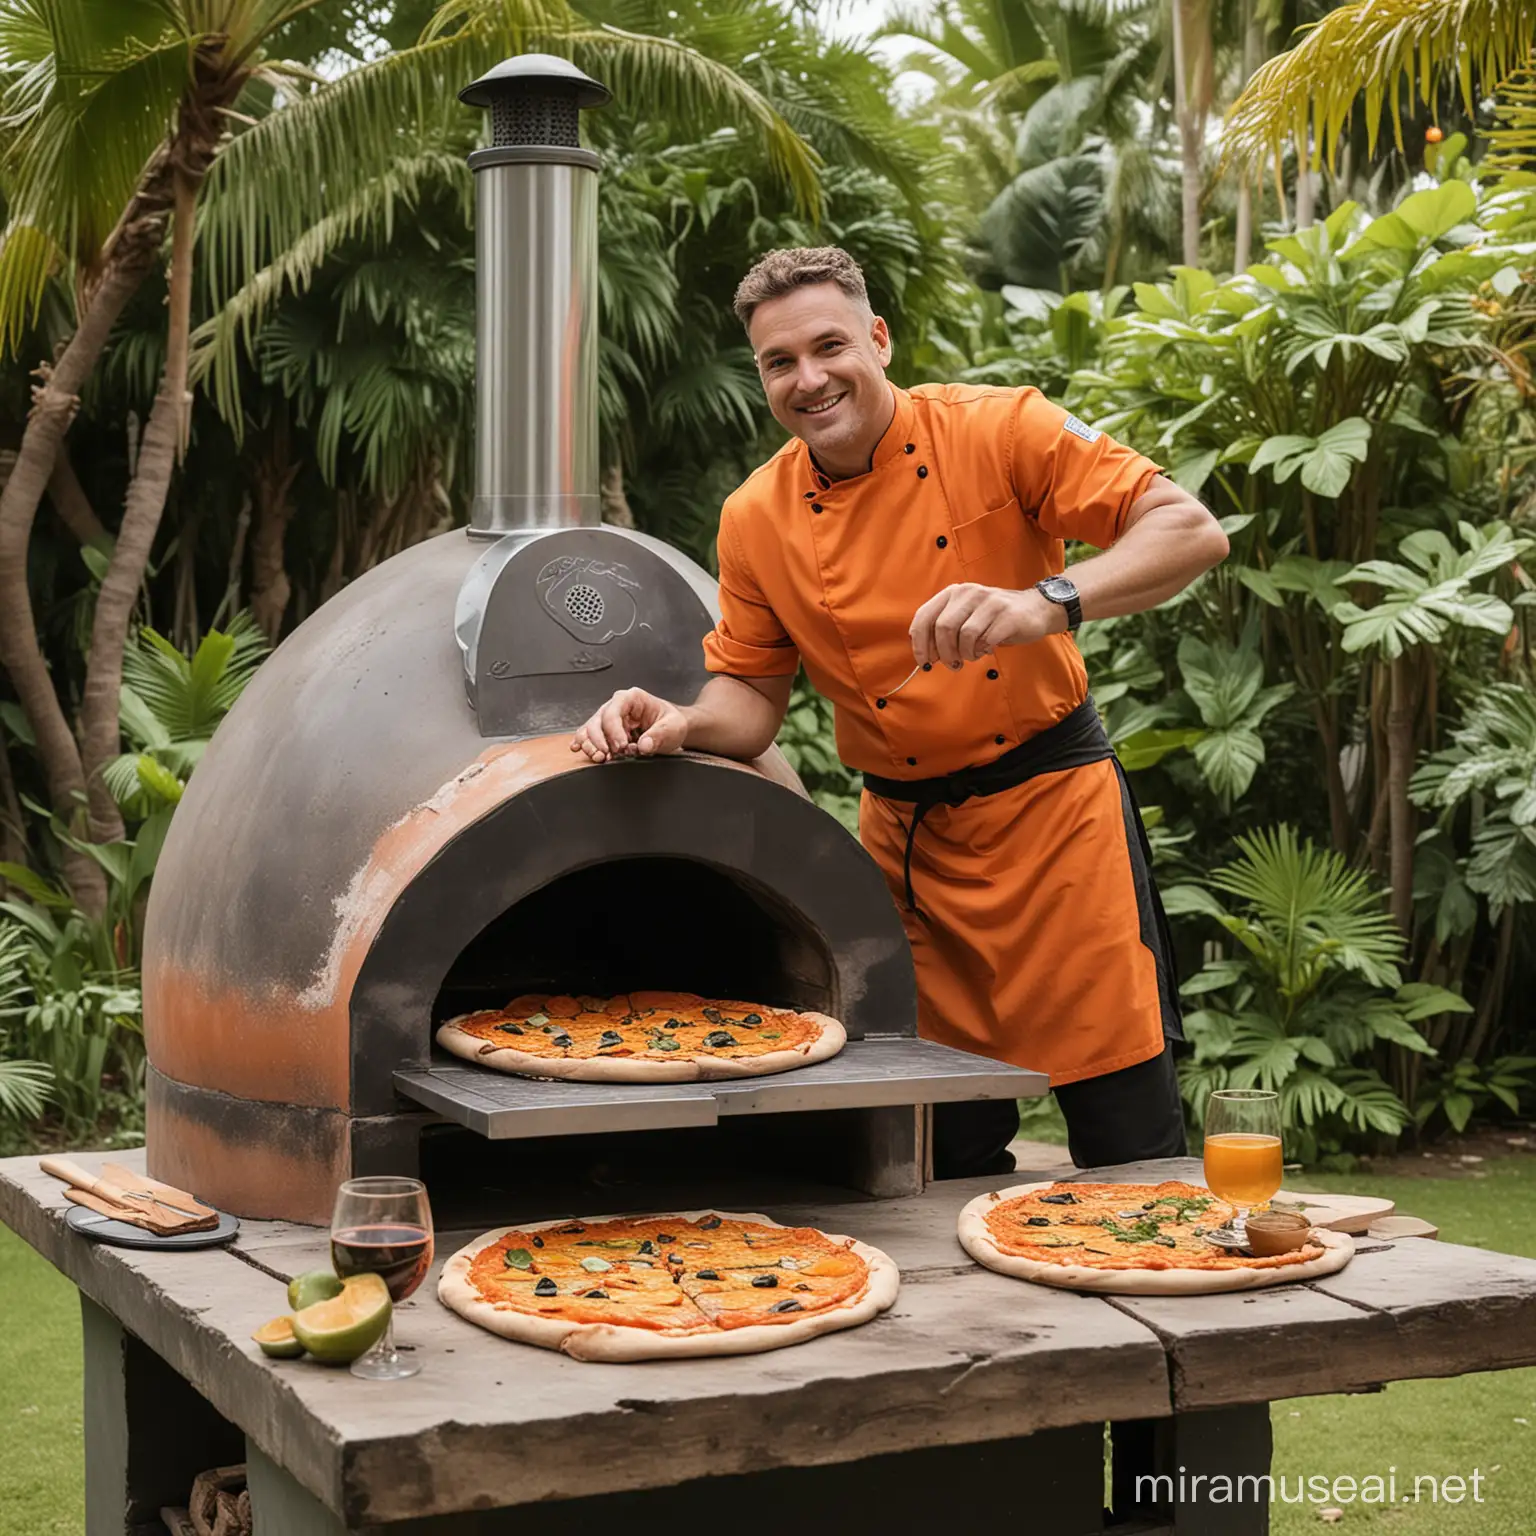 a tranqil settin in a tropical garden, an outdoor kitchen, chef in a orange and black uiform smiling and making pizza in an outdoor oven, peole drinking wine and eaating pizza enjoying the relaxed ambiance